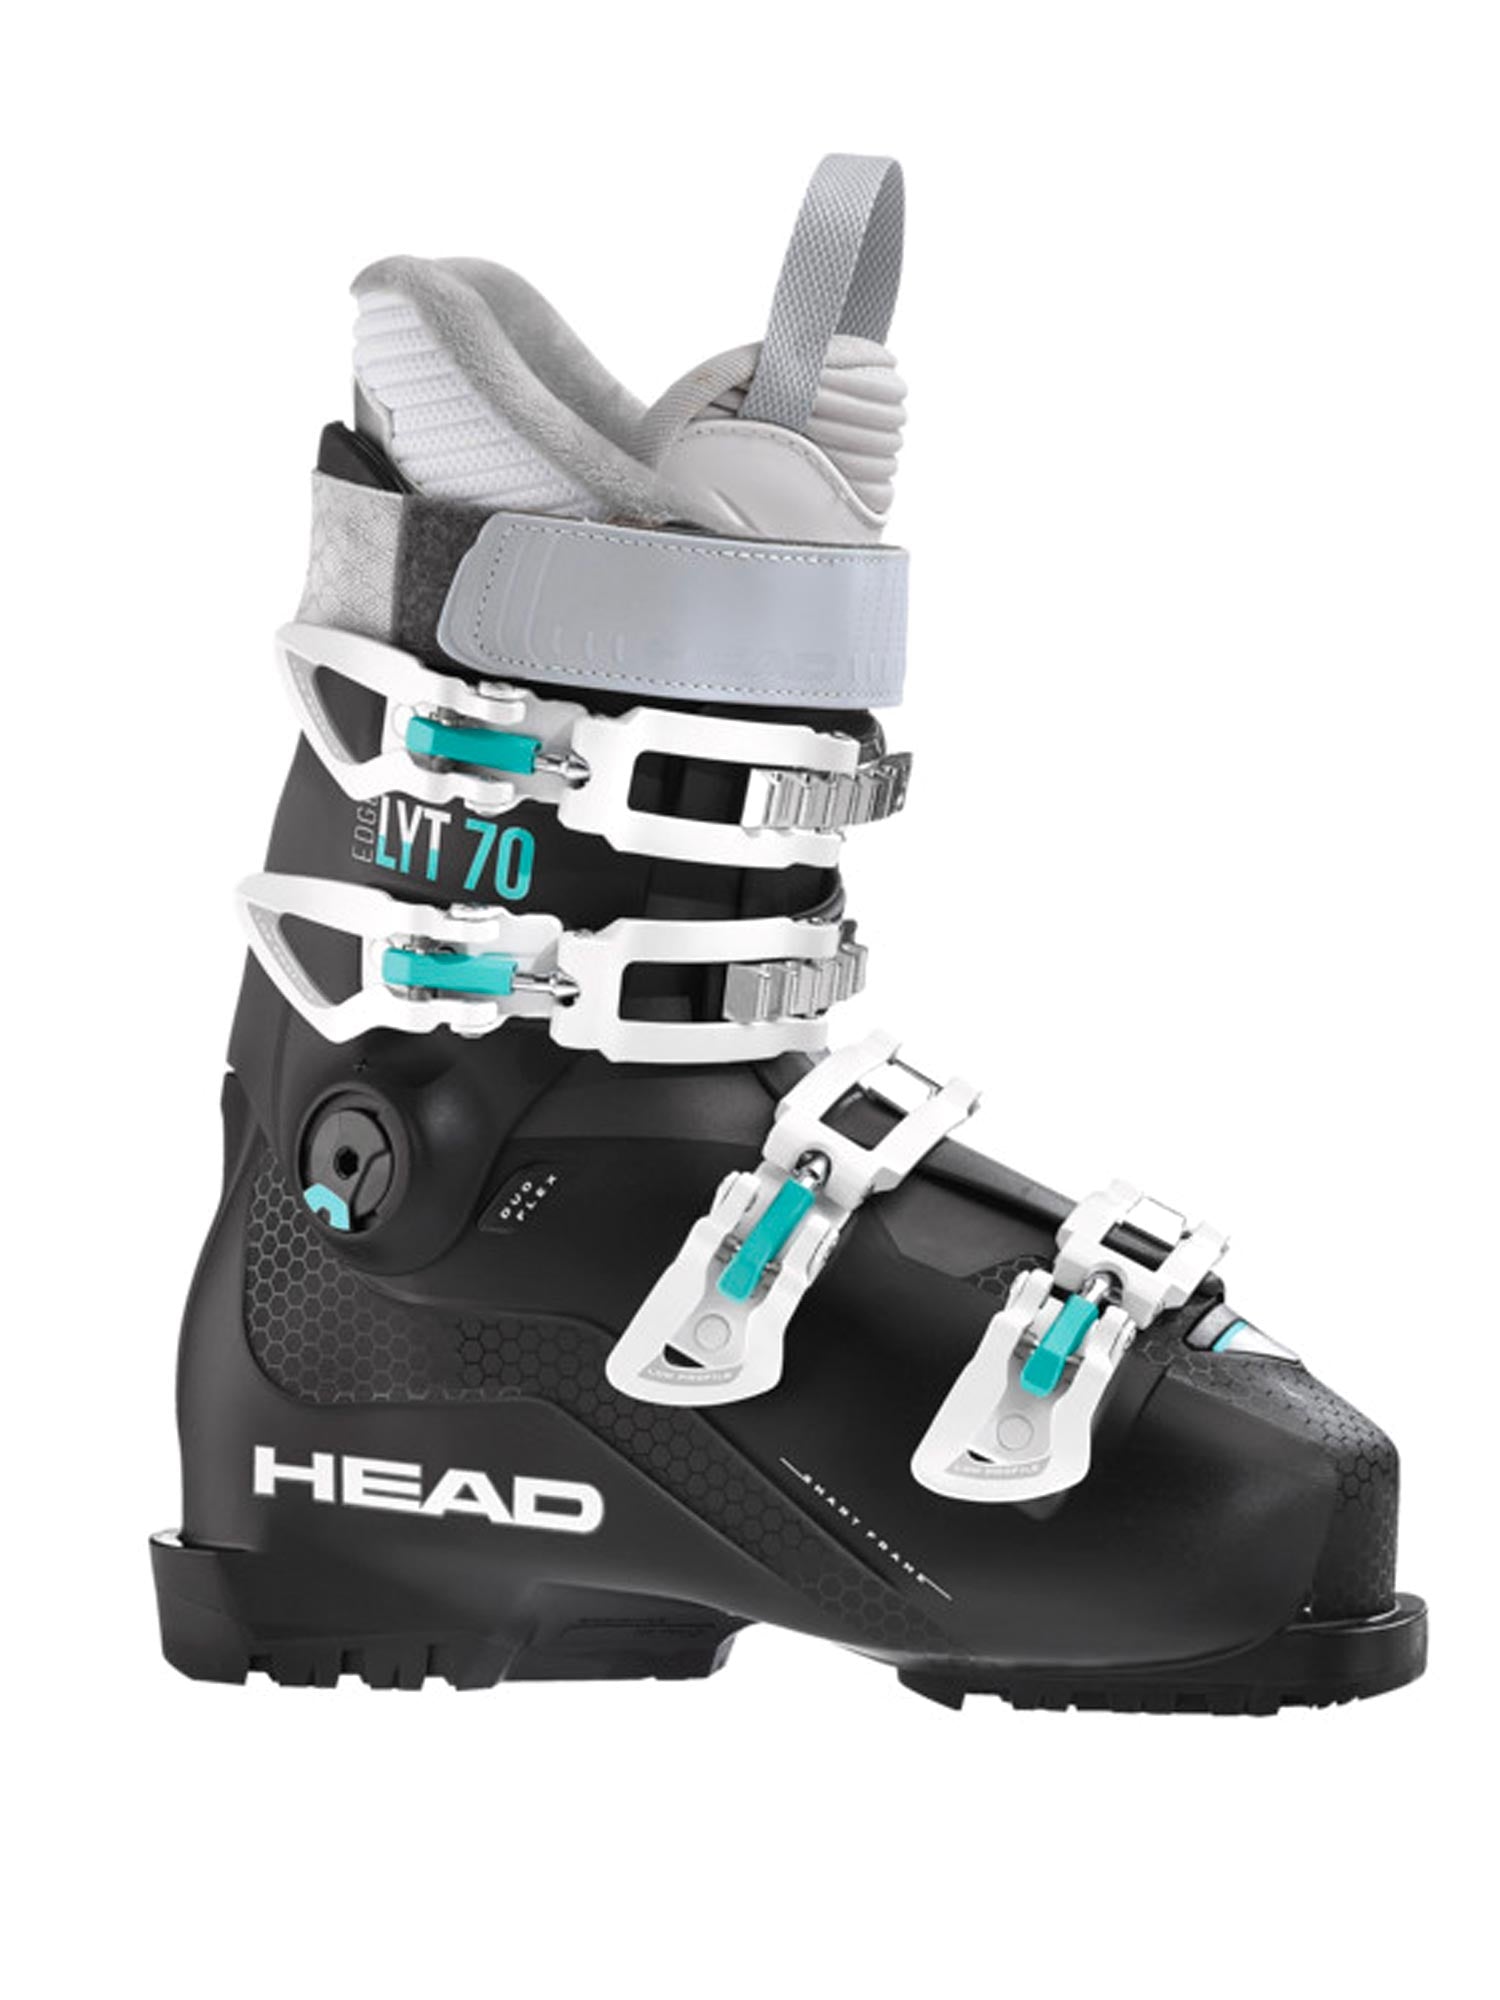 women's Head Edge Lyt ski boots, black with white & teal accents